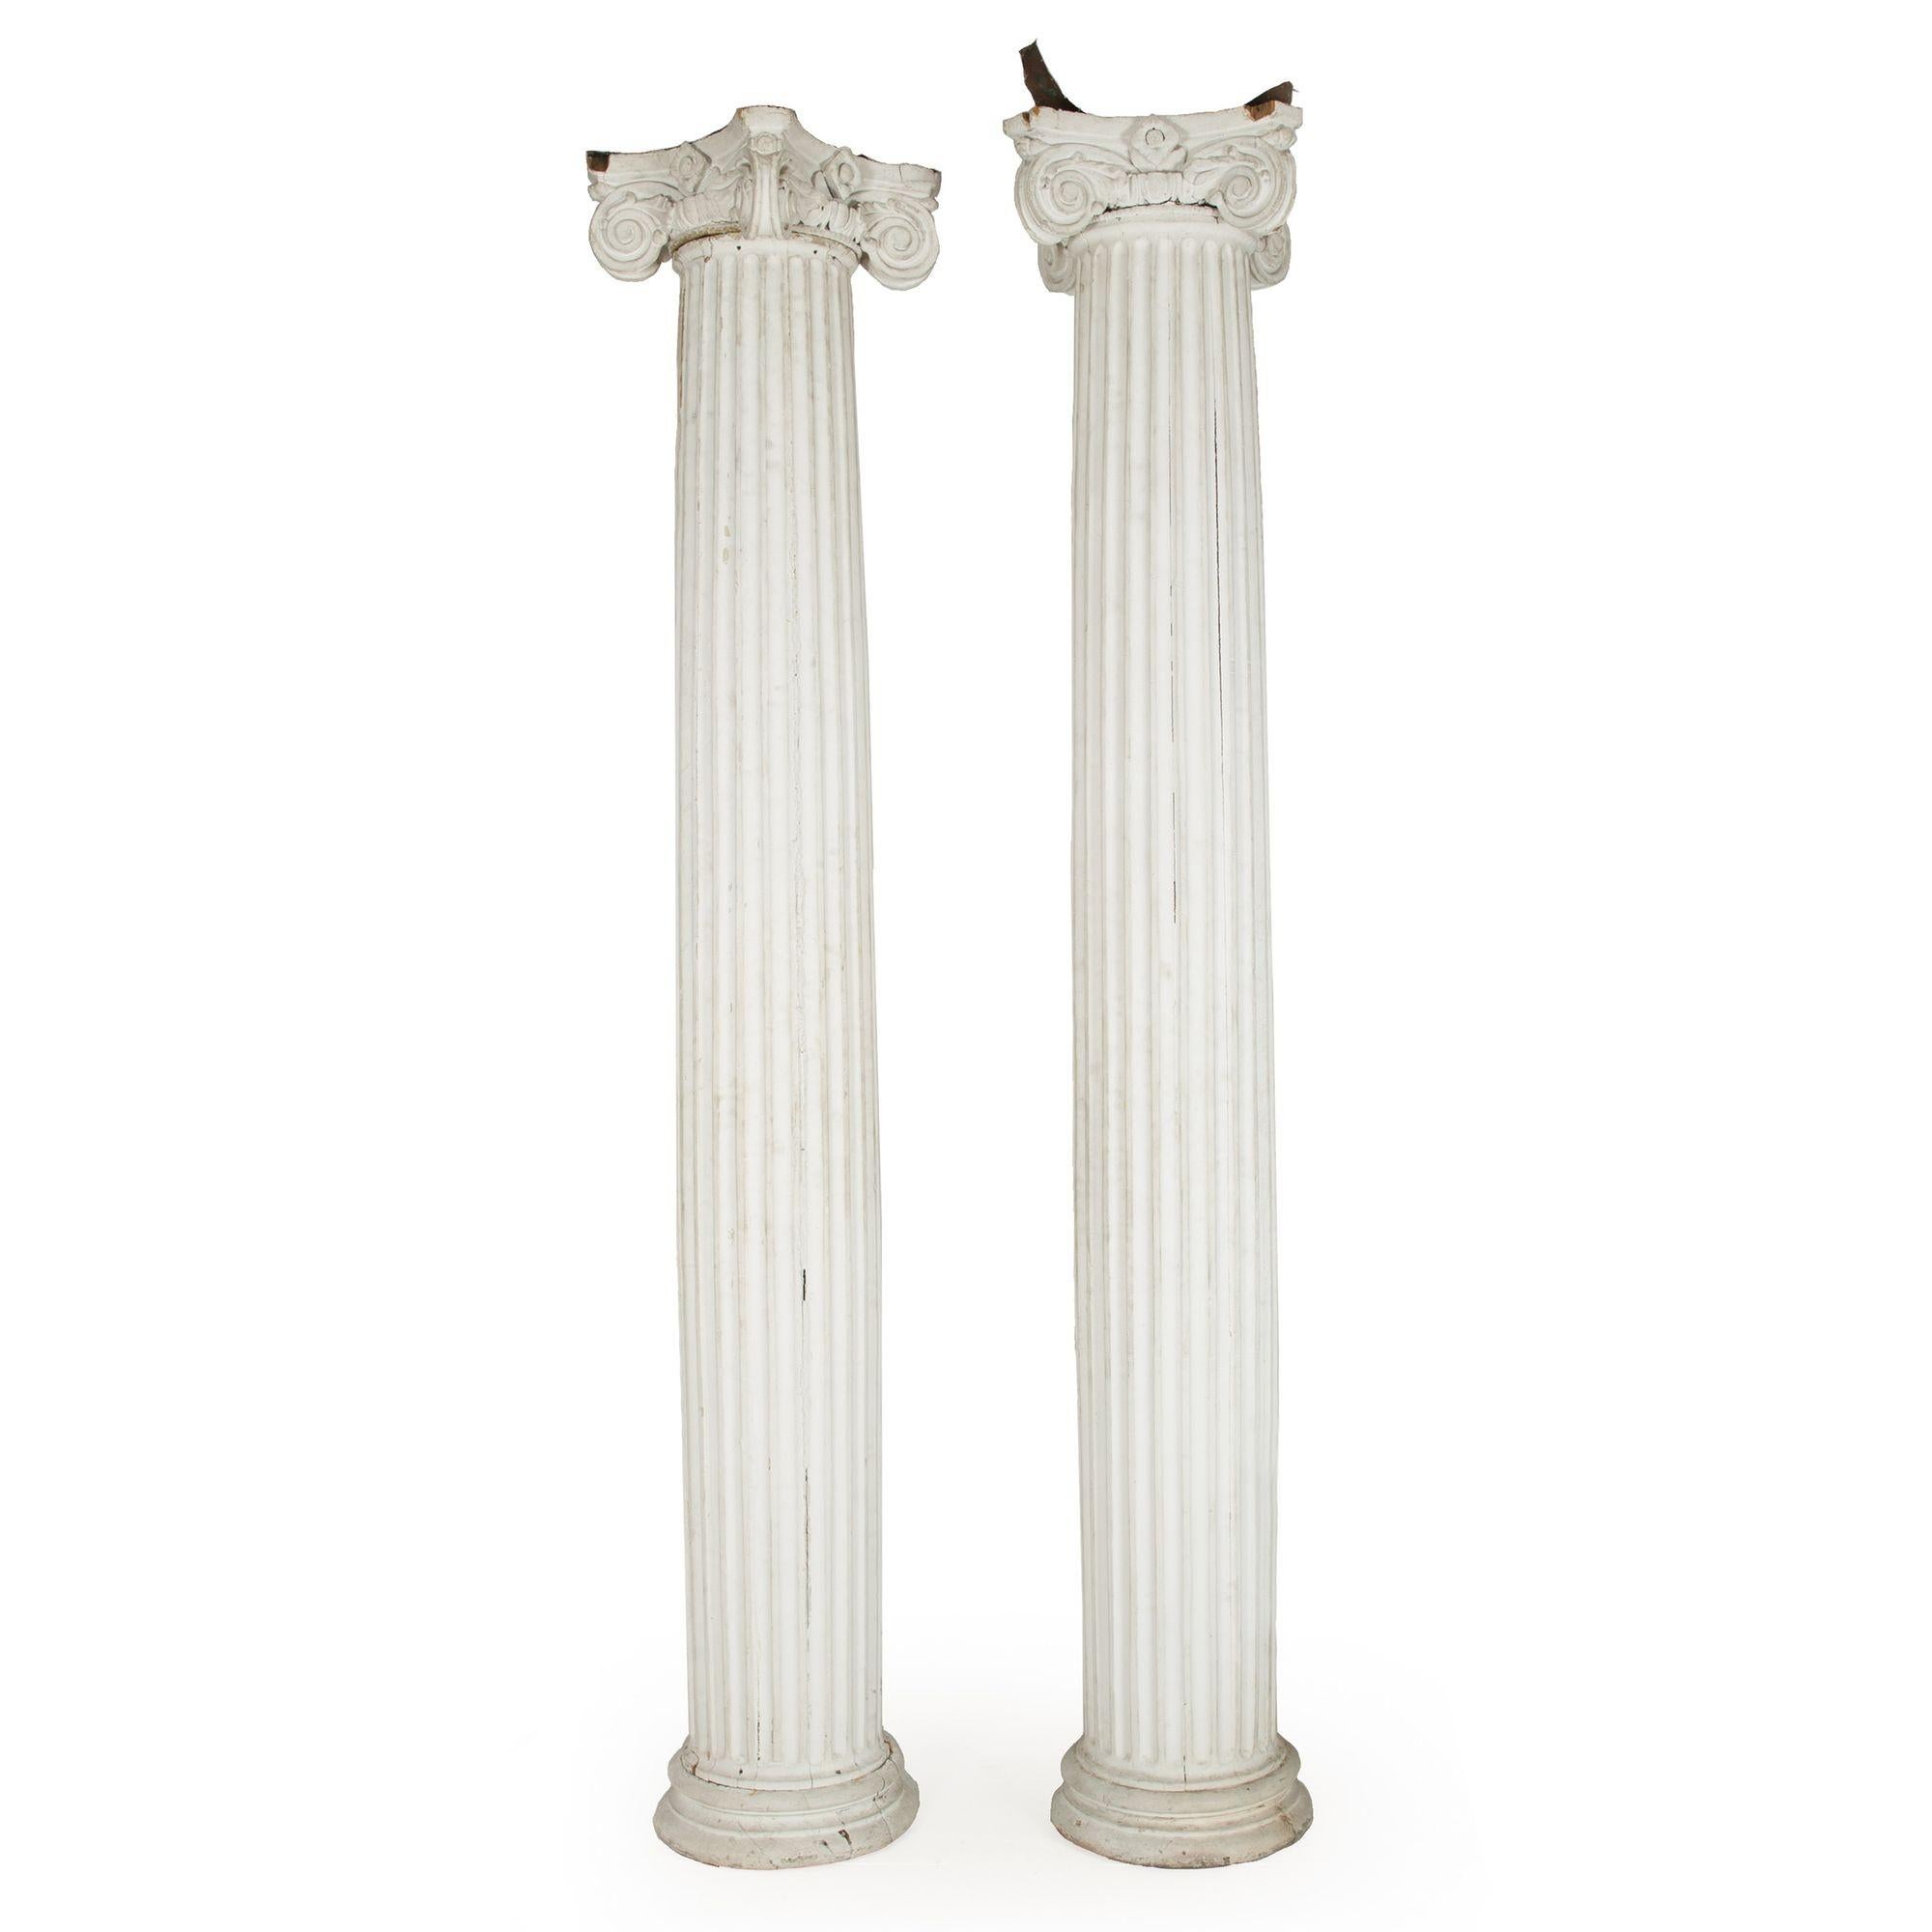 A fantastic pair of 19th century full-length columns standing a full 104